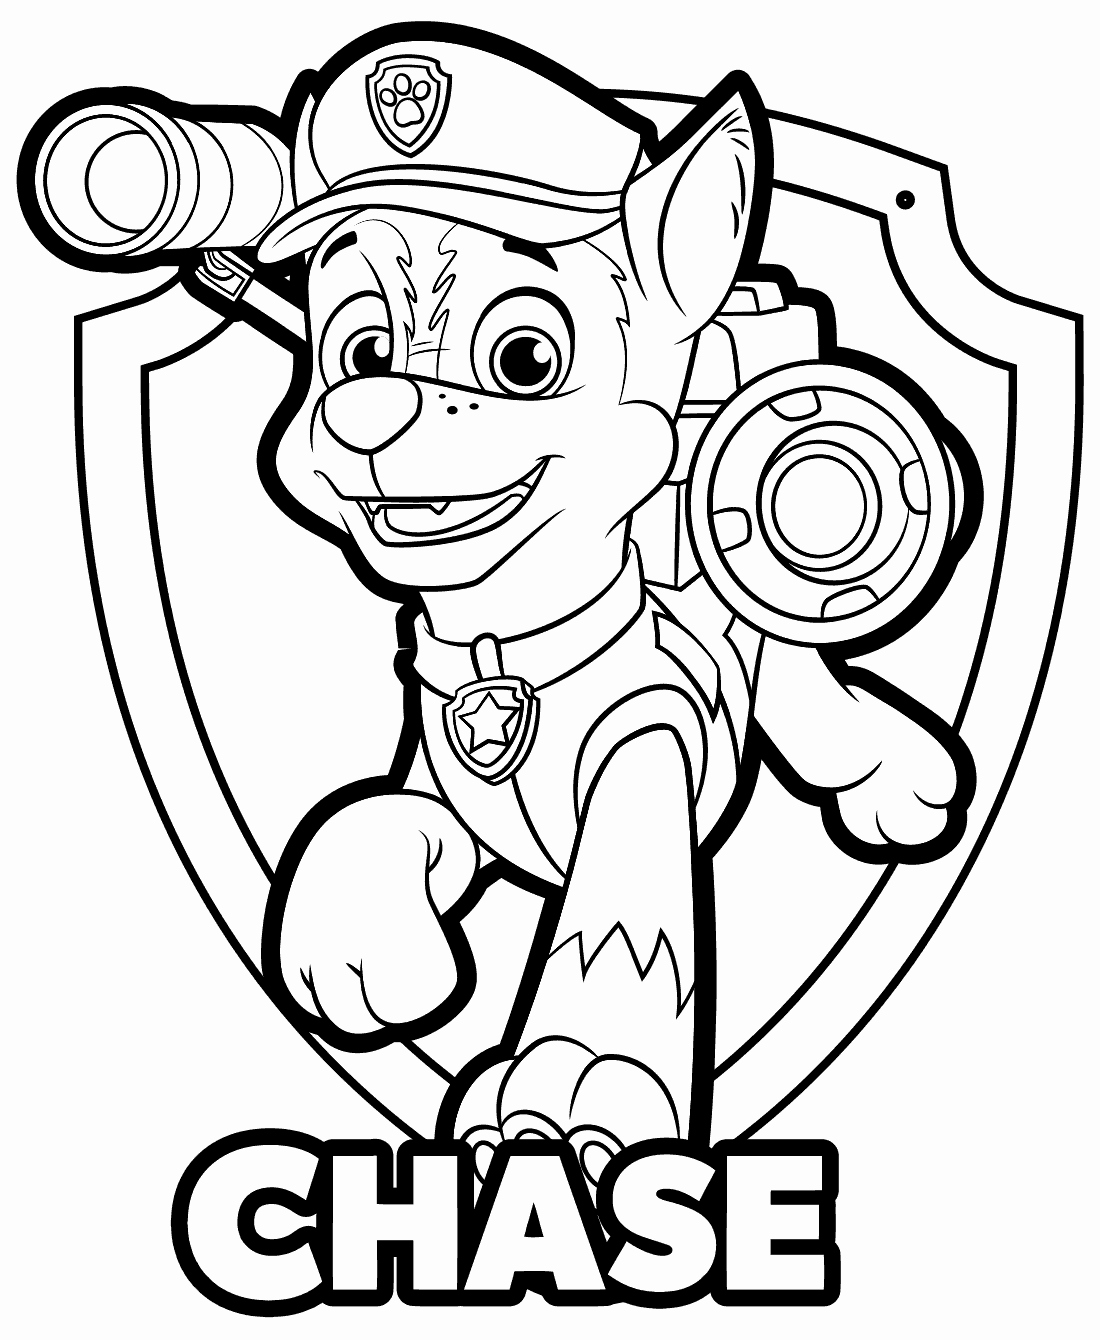 Chase Paw Patrol Coloring Pages at GetColorings.com | Free printable